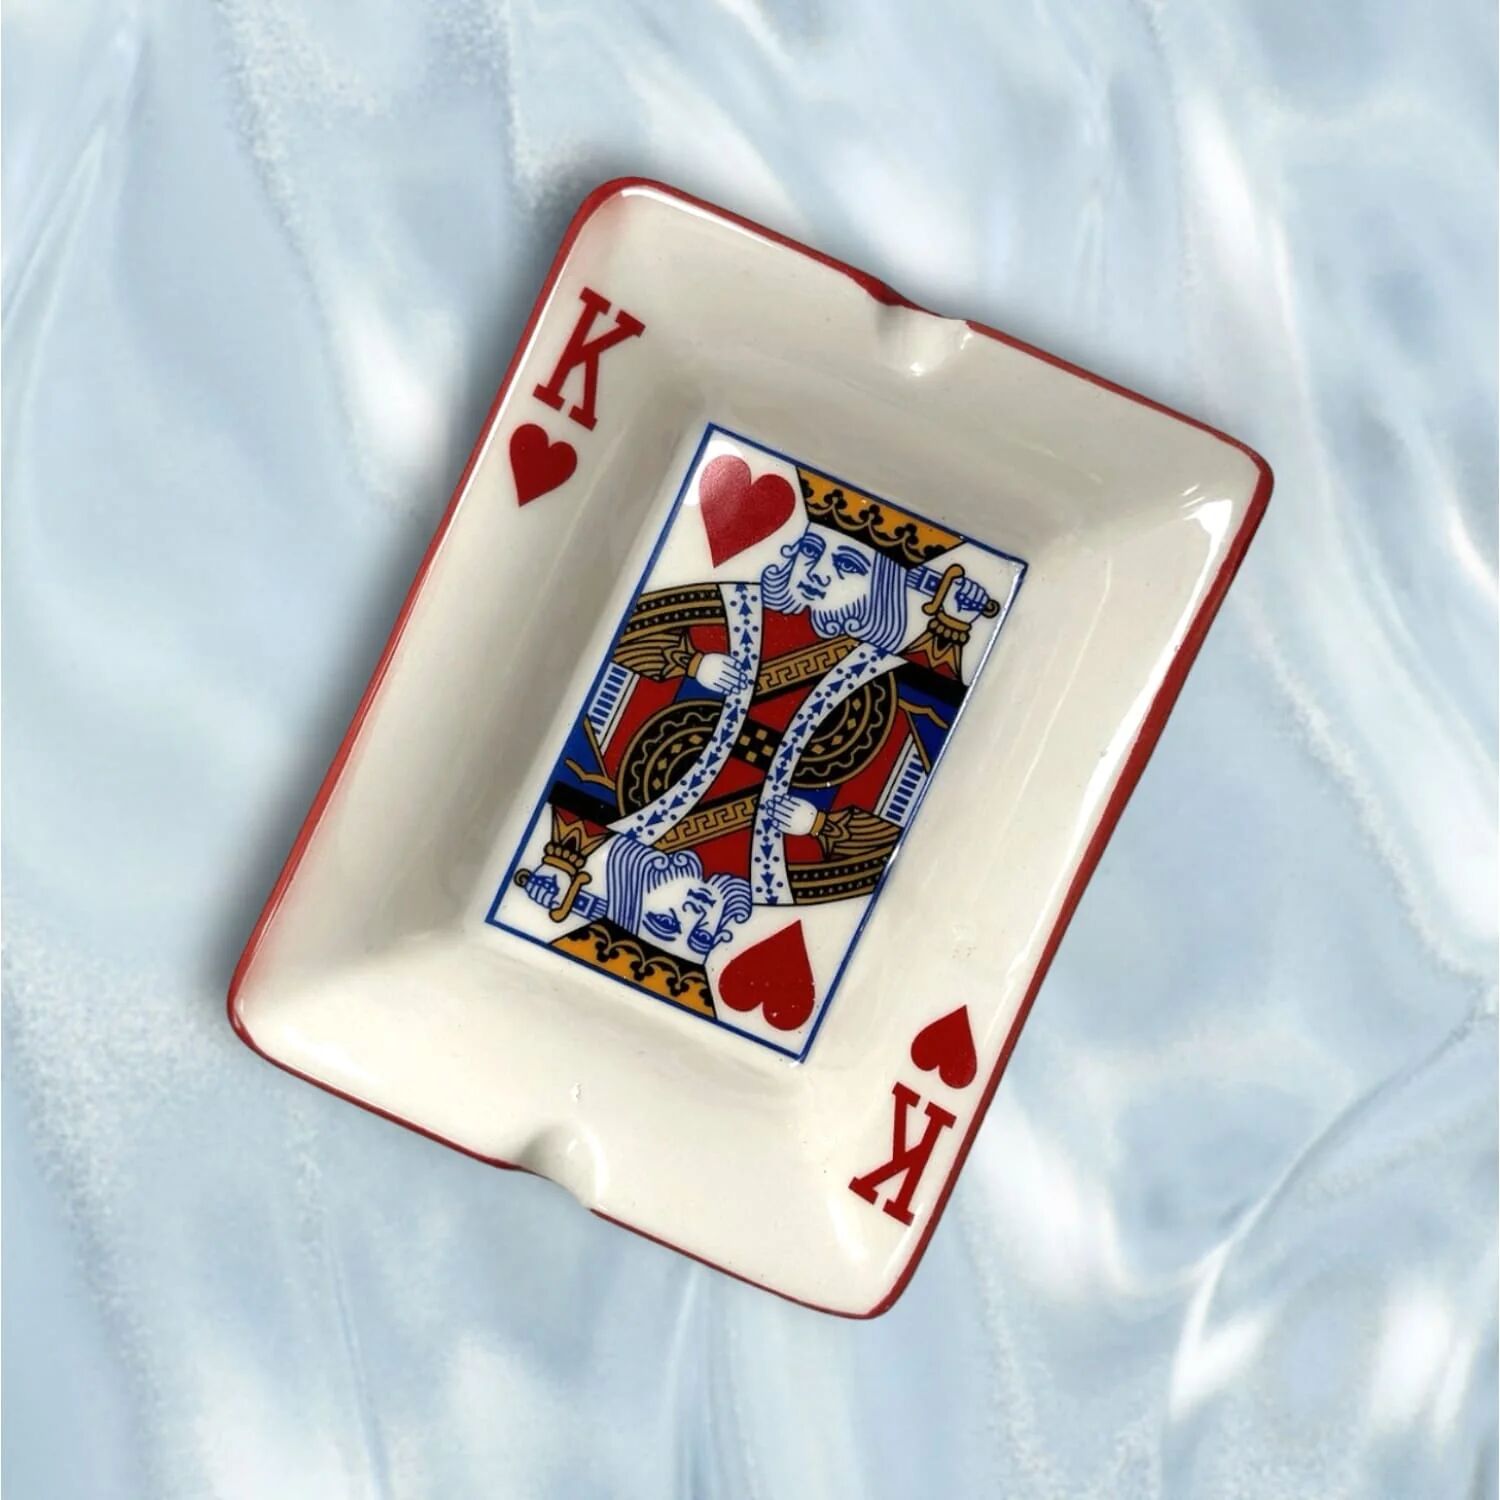 Misc. King of Hearts Playing Card Ashtray